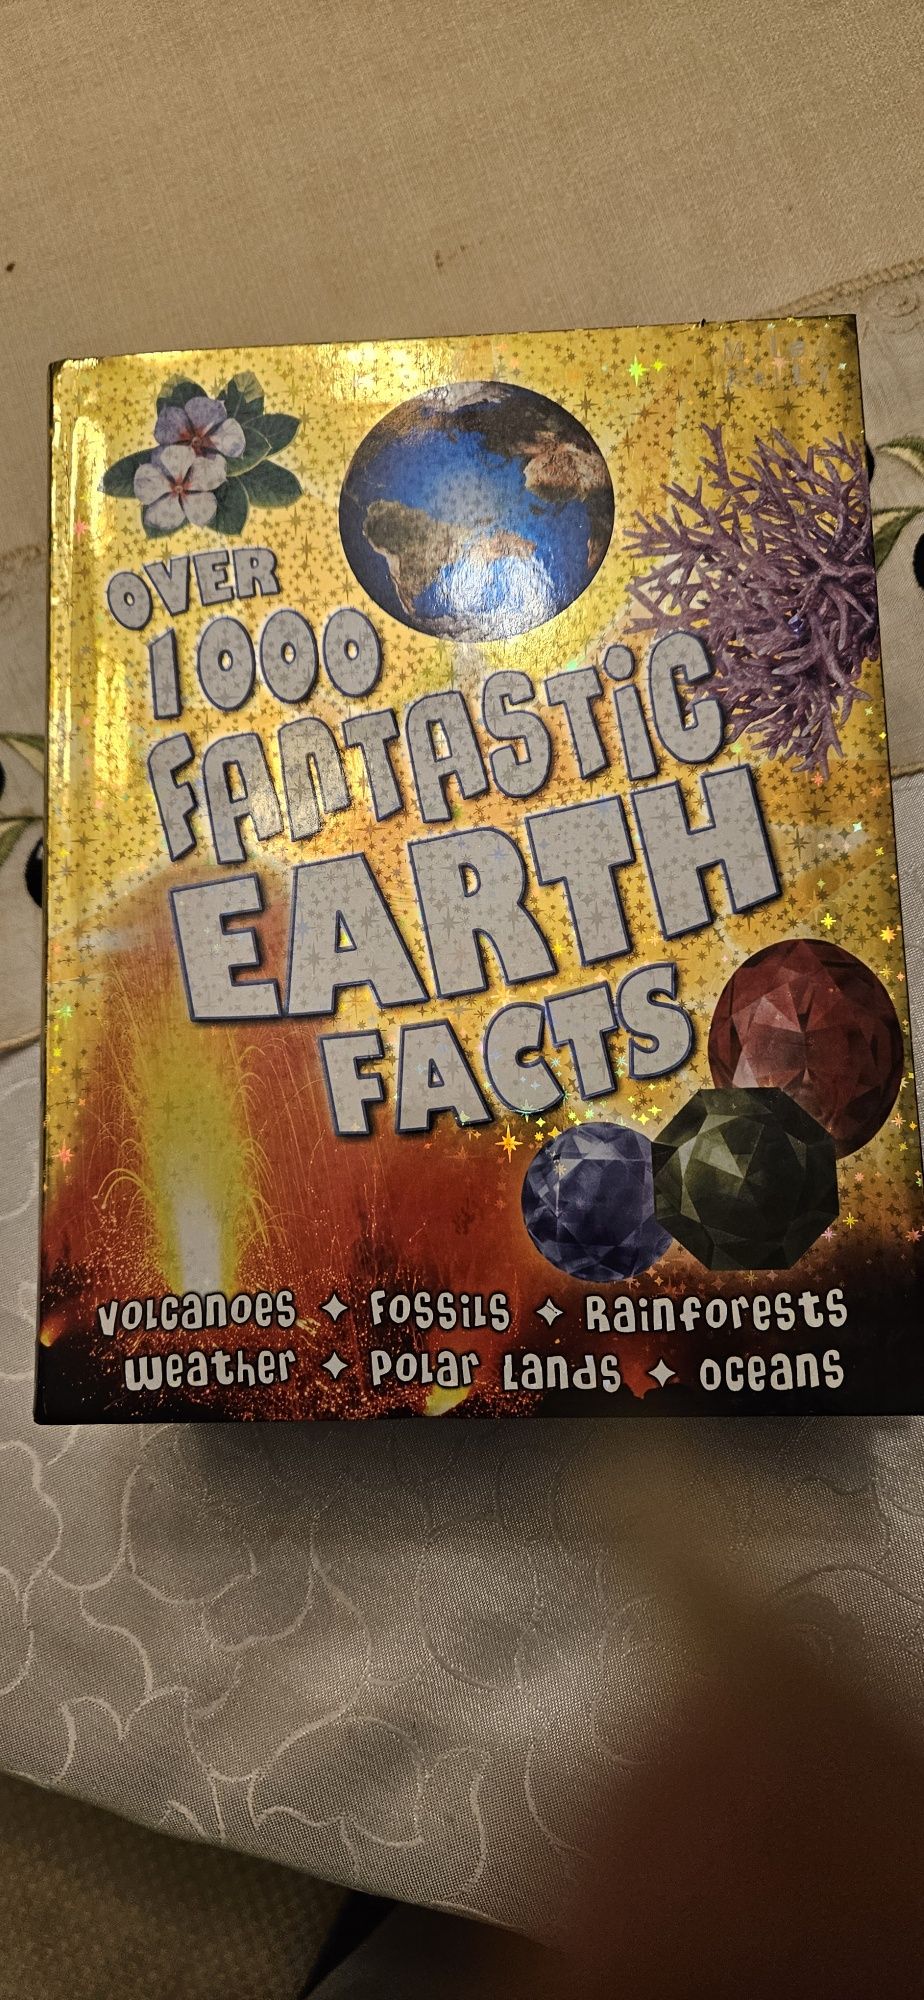 Po angielsku Over 1000 fantastic earth facts